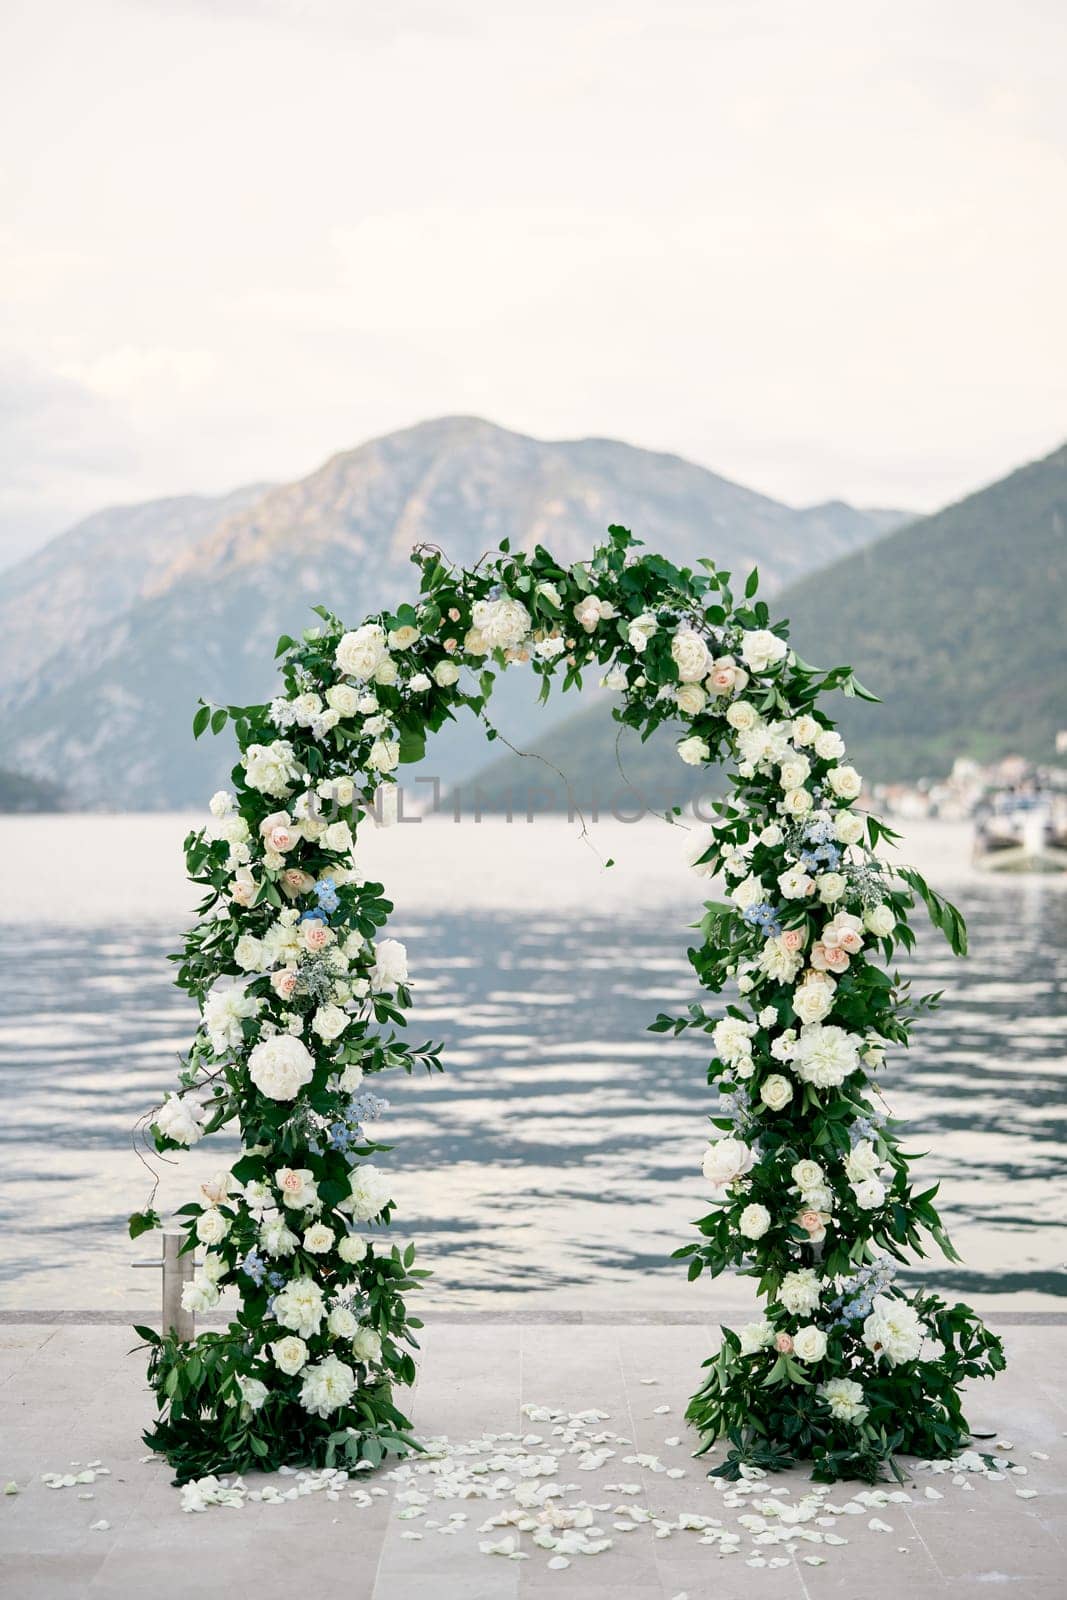 Wedding arch stands on a pier strewn with flower petals by Nadtochiy